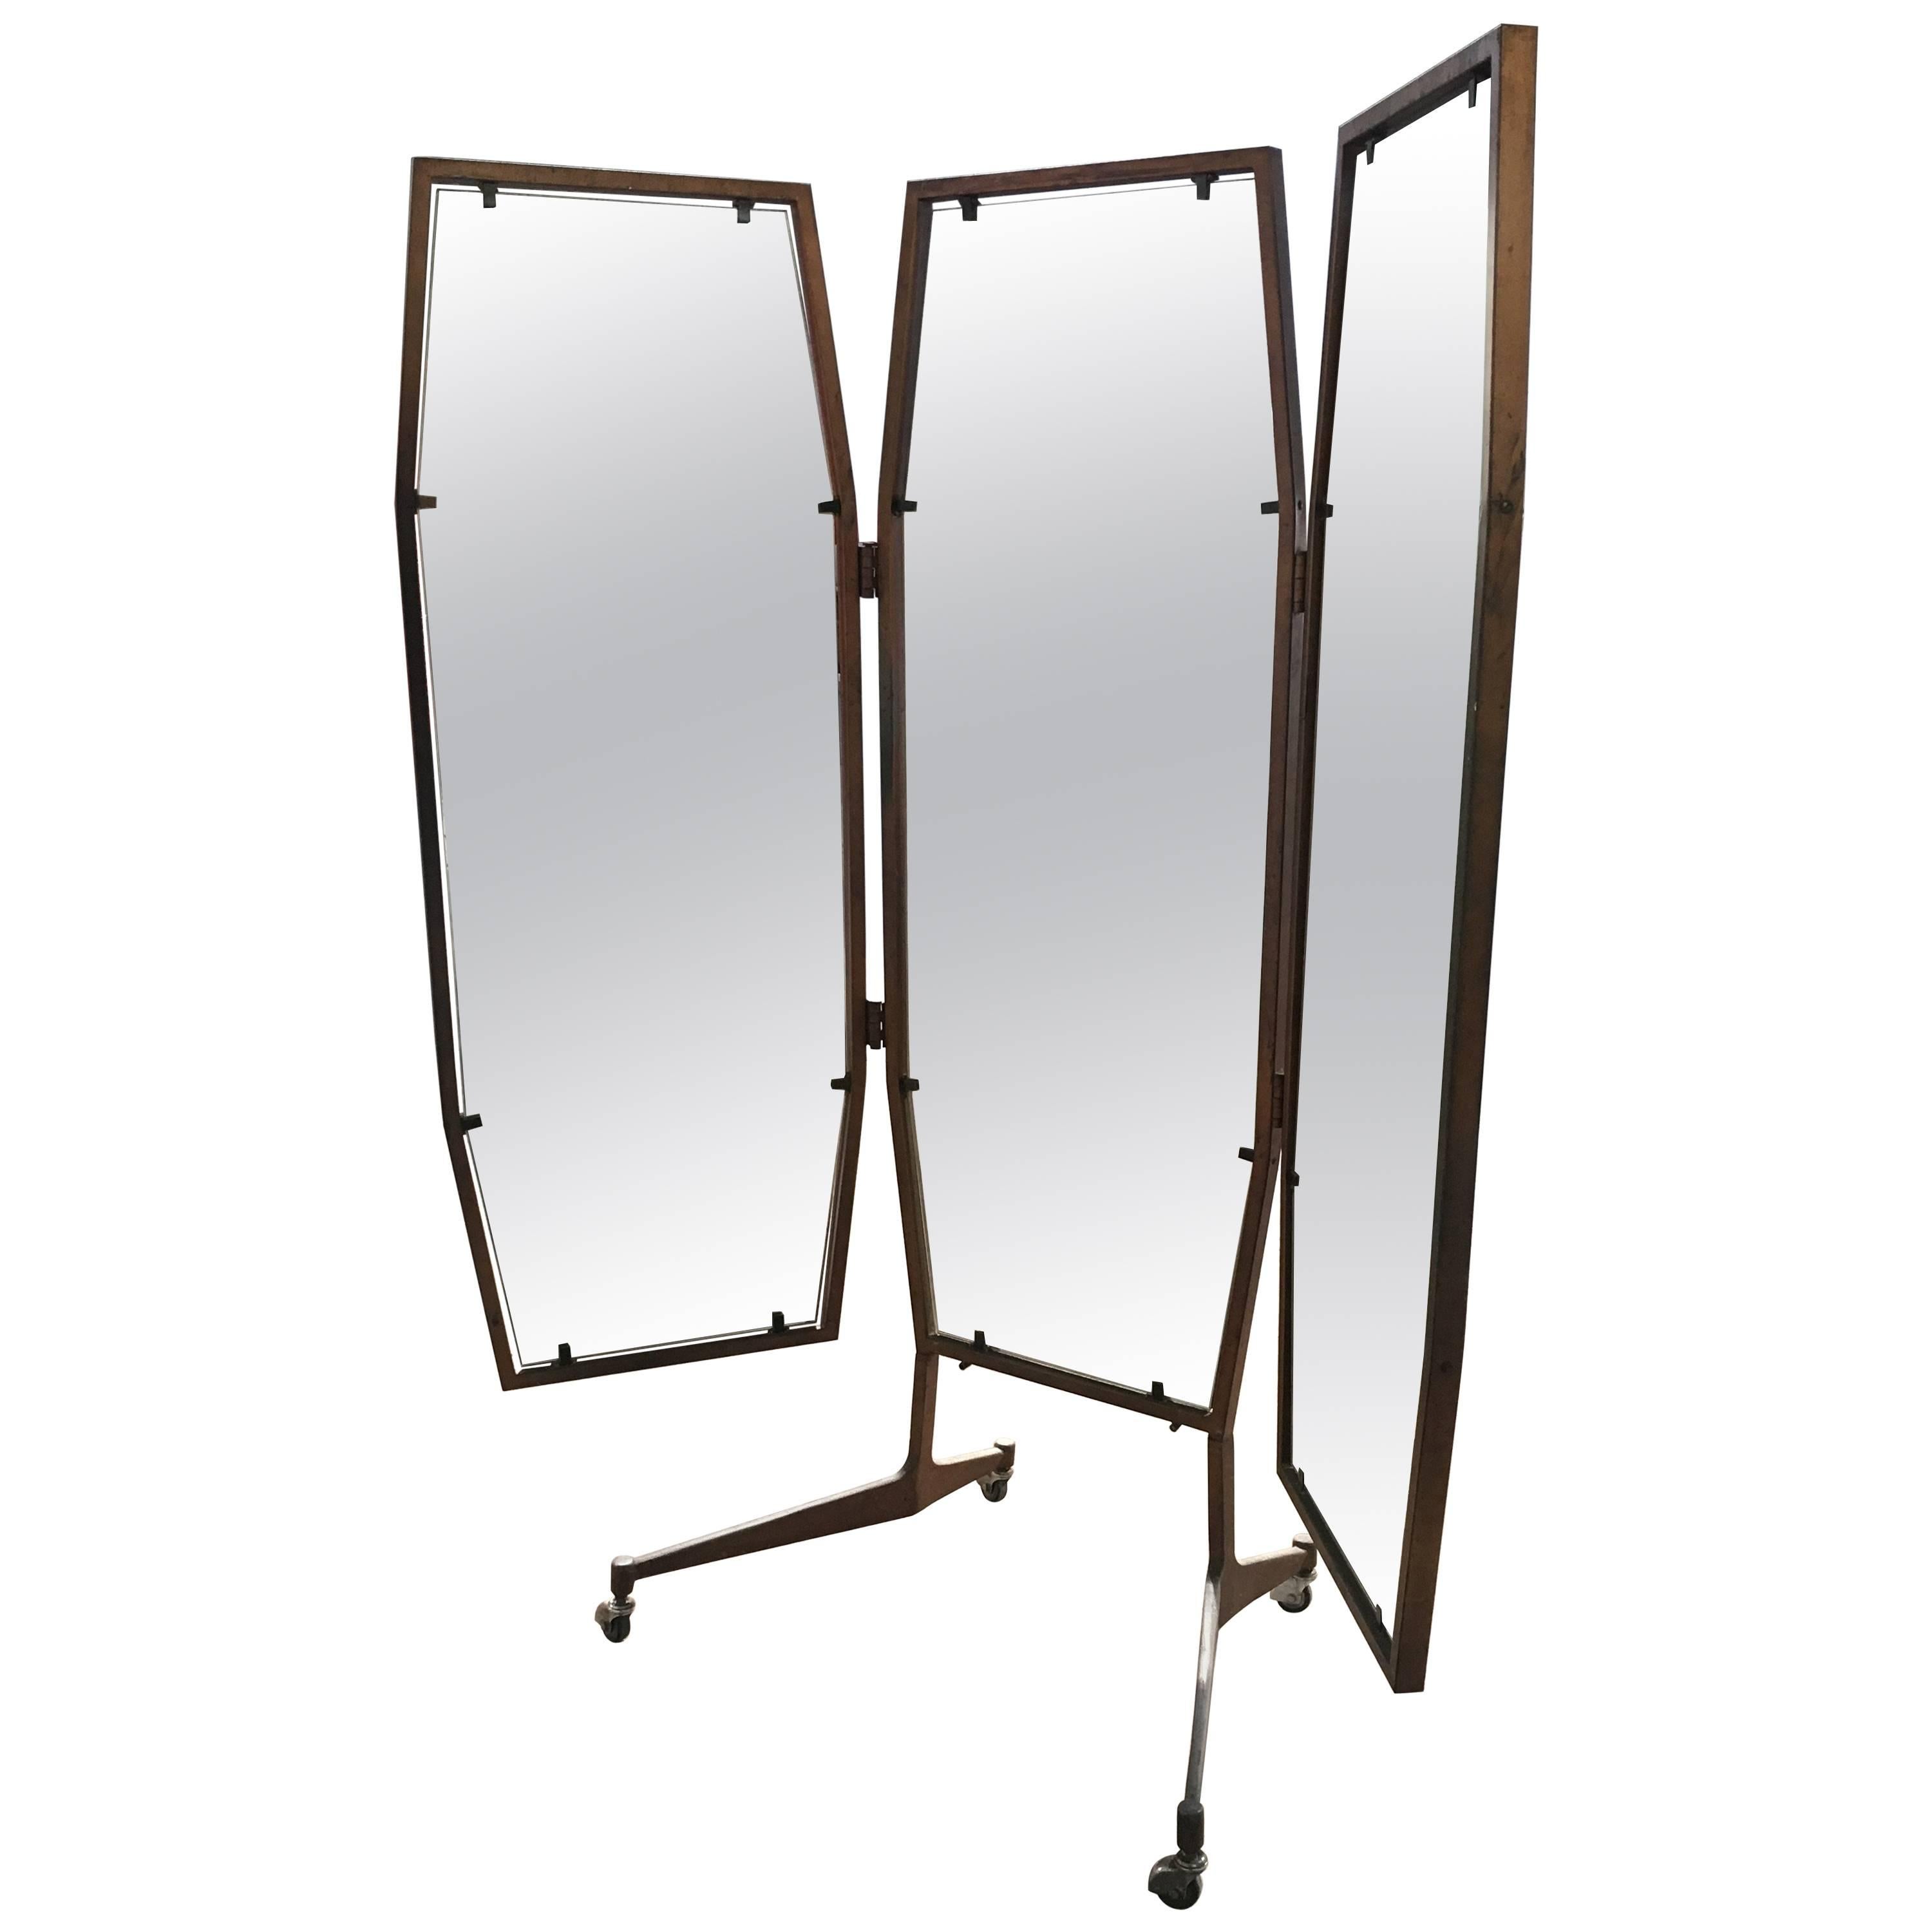 Italian Triptych Standing Mirror on Wheels from 1960s